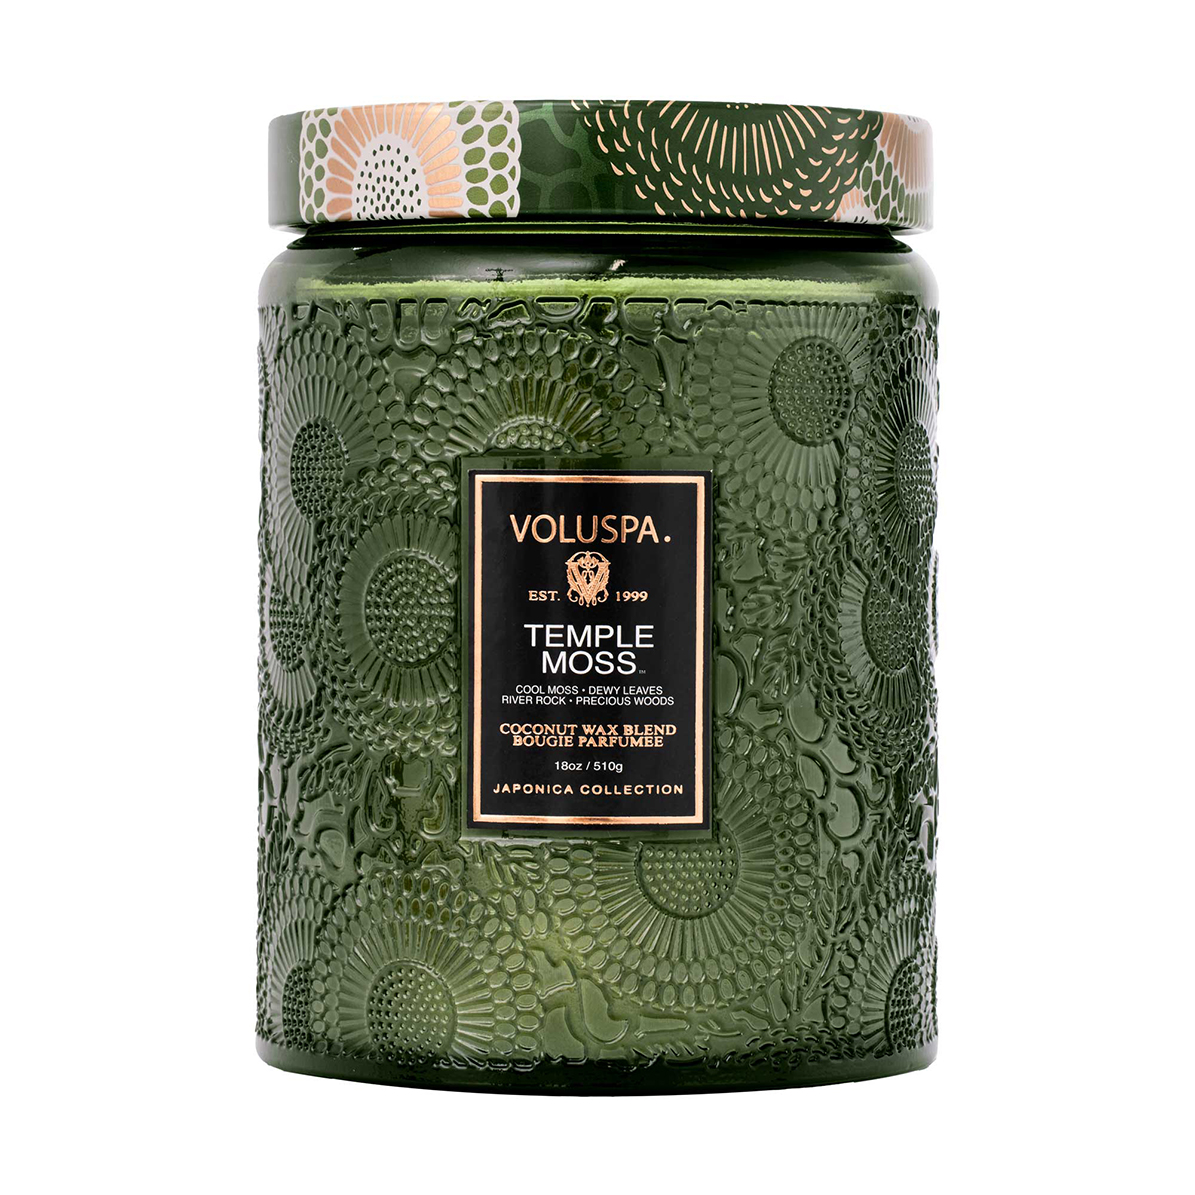 TEMPLE MOSS SCENTED CANDLE IN LARGE JAR 1